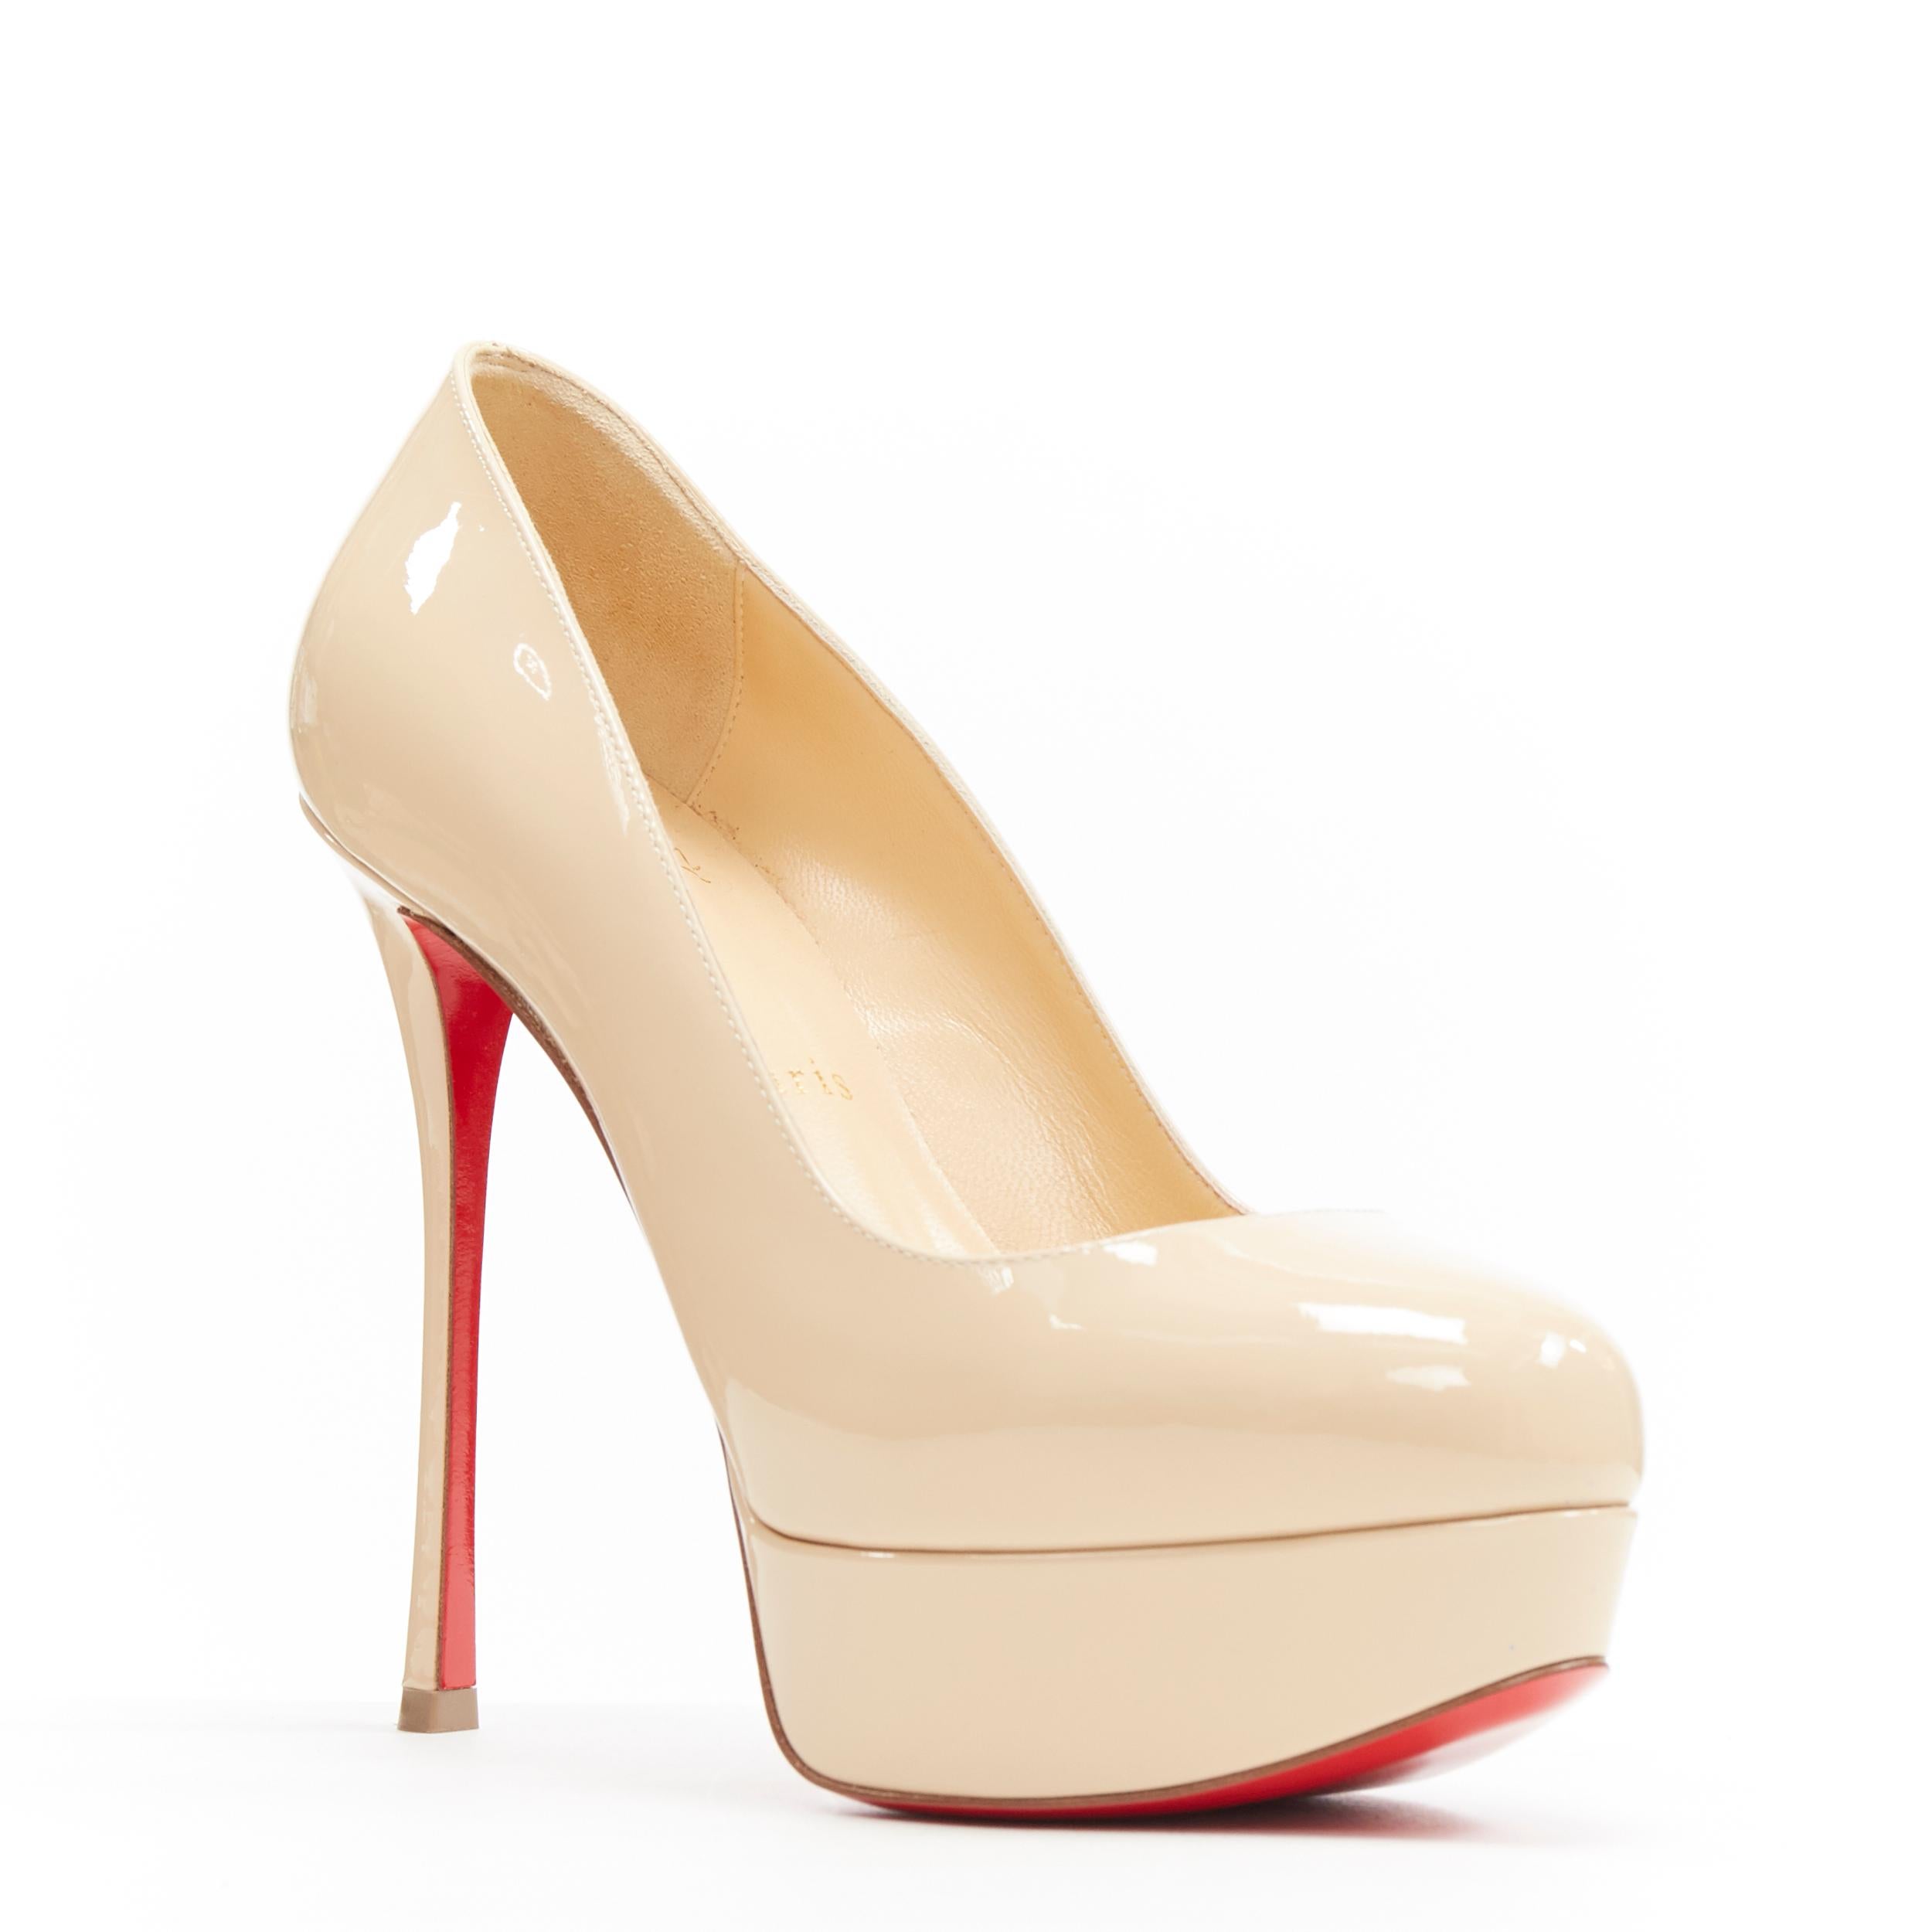 new CHRISTIAN LOUBOUTIN Dirditta 130 nude beige patent round toe platform EU35.5
Brand: Christian Louboutin
Designer: Christian Louboutin
Model Name / Style: Dirditta 130
Material: Patent leather
Color: Beige
Pattern: Solid
Closure: Zip
Extra